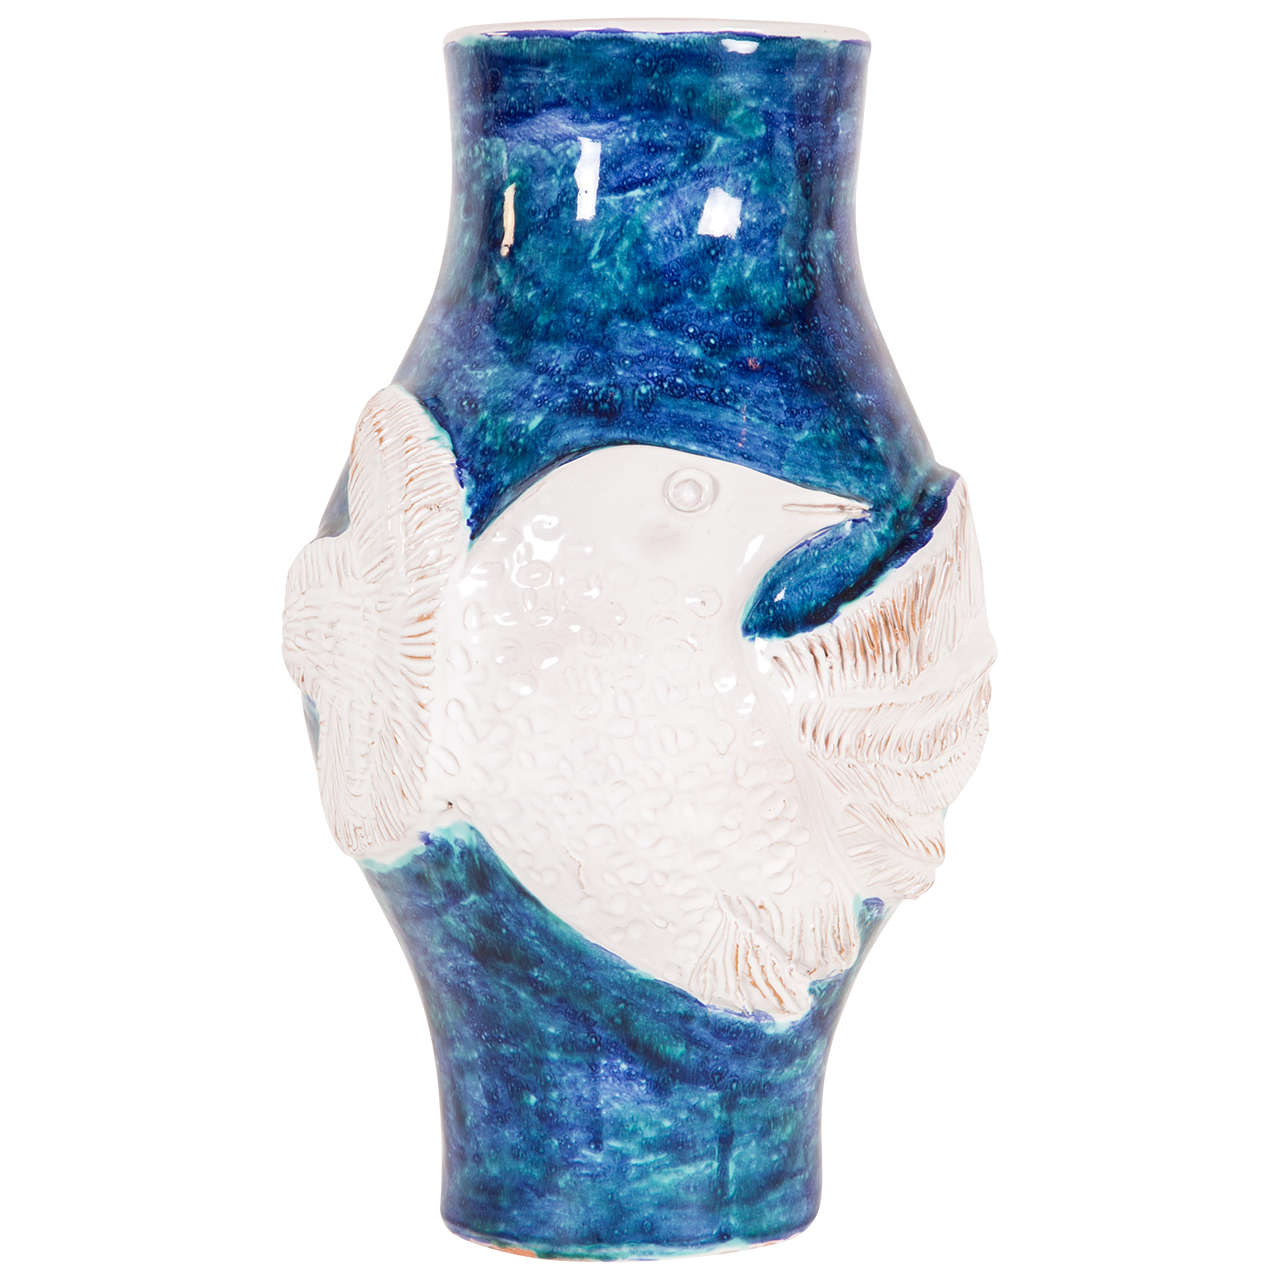 Blue White Vase with Bird Gigi, circa 1960s by Robert and Jean Cloutier For Sale